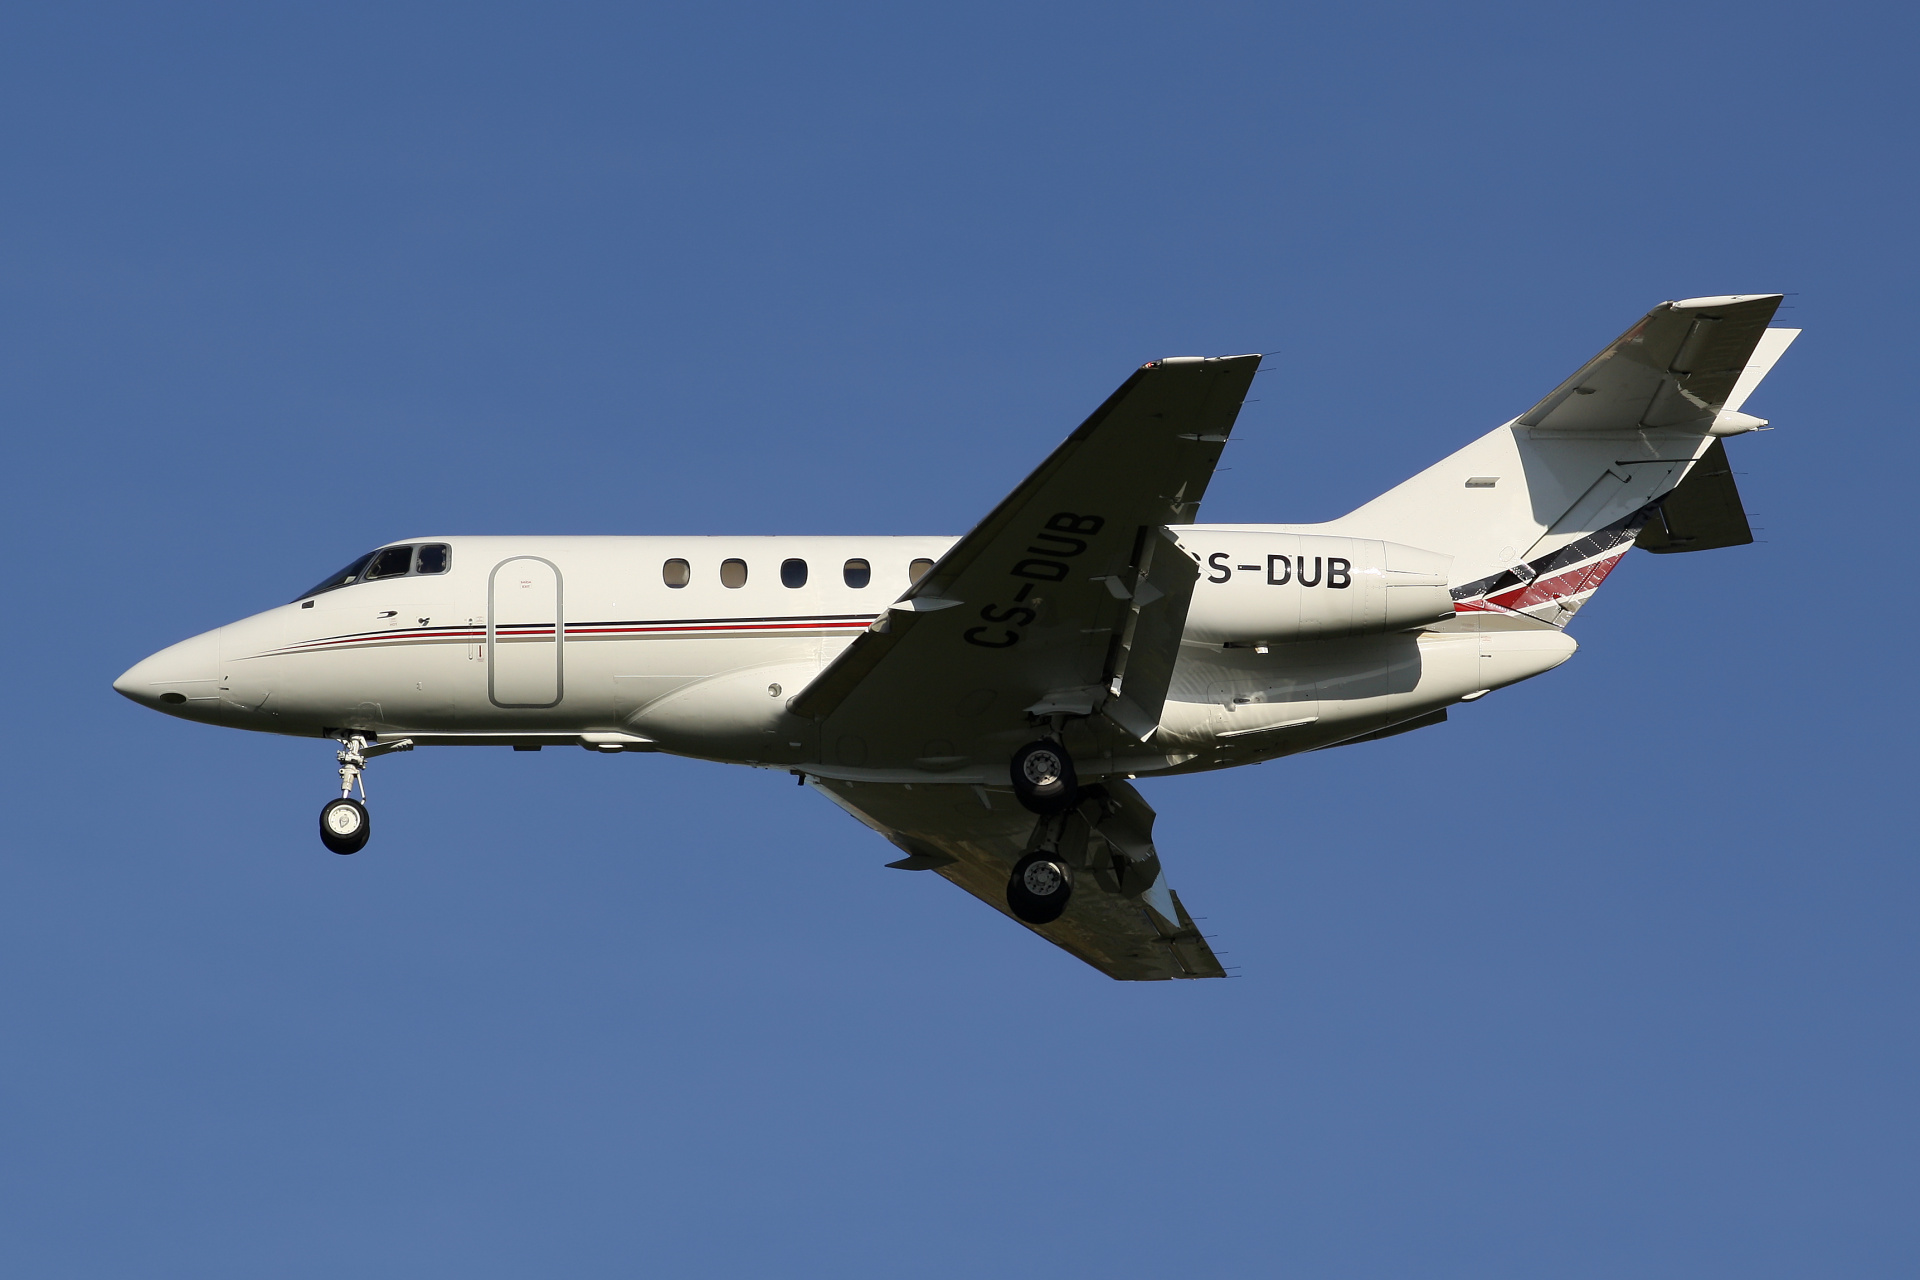 CS-DUB, NetJets Europe (new livery) (Aircraft » EPWA Spotting » BAe 125 and revisions » Raytheon Hawker 750)